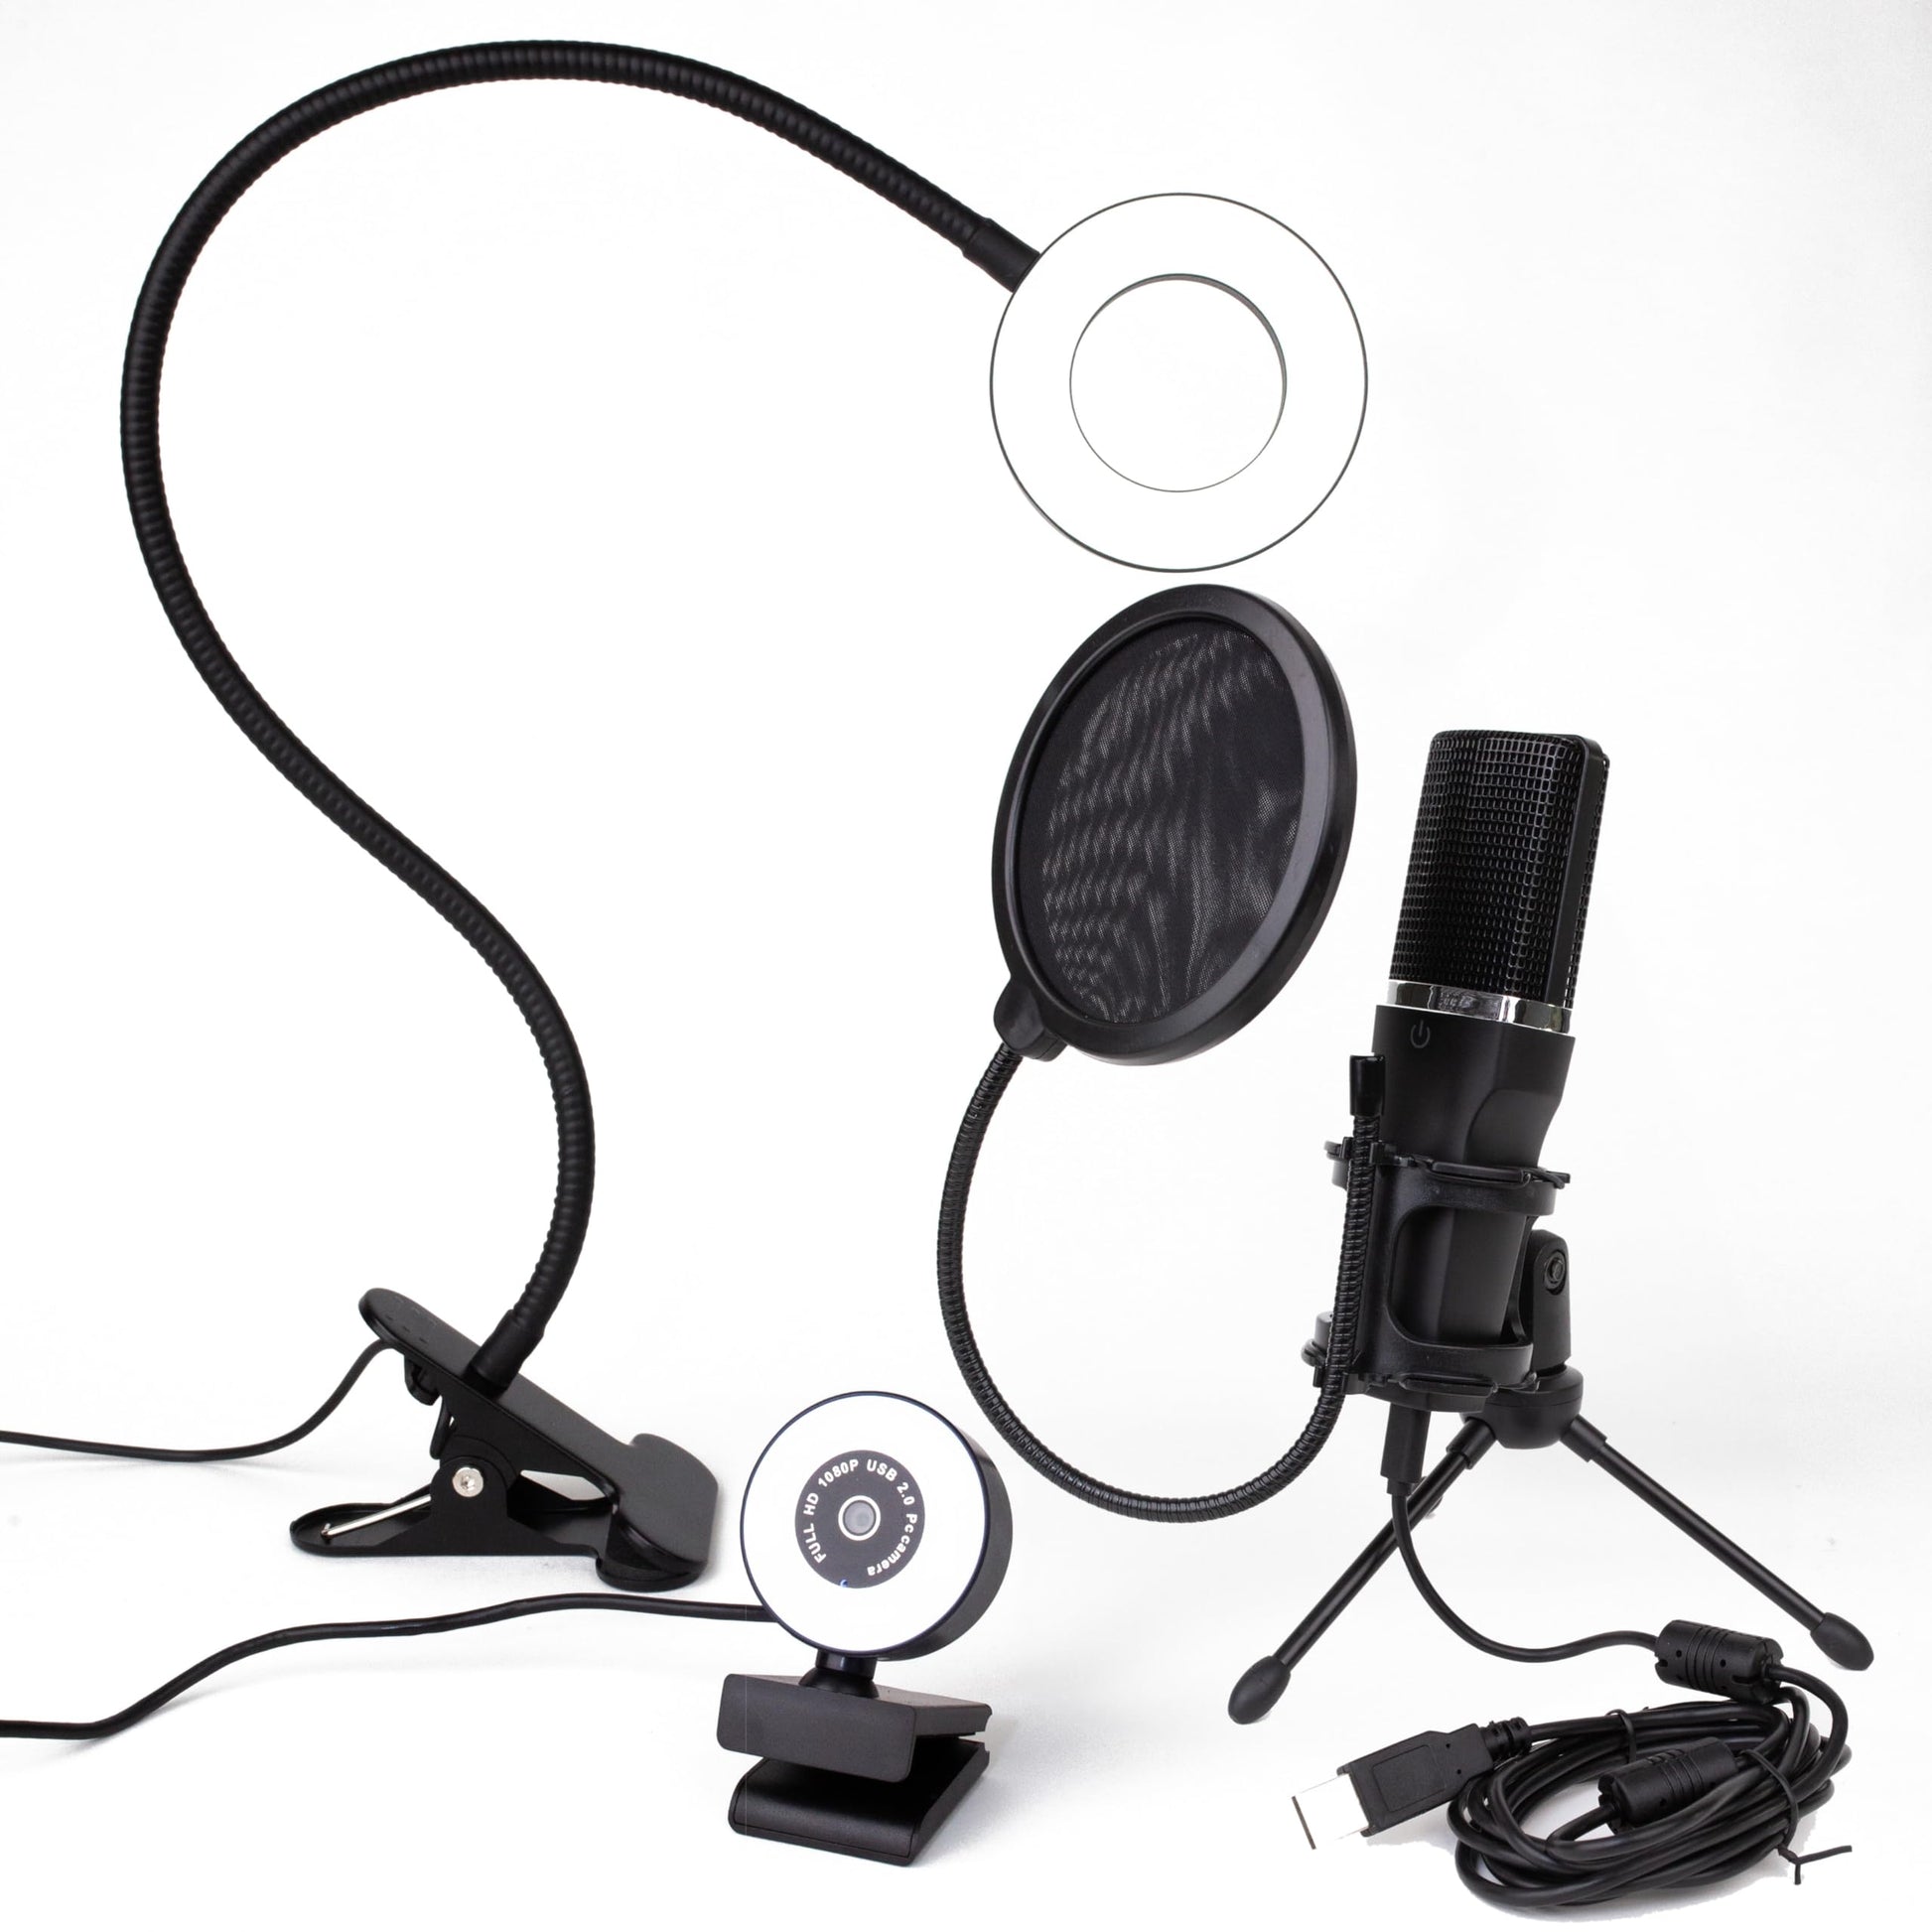 Live Streaming Kit- Perfect for Streaming Video Games on Twitch, YouTube, Podcasts and Working from Home. Includes 1920x1080p Webcam, Professional USB Microphone, and One LED Multi-Color Light - amzGamess